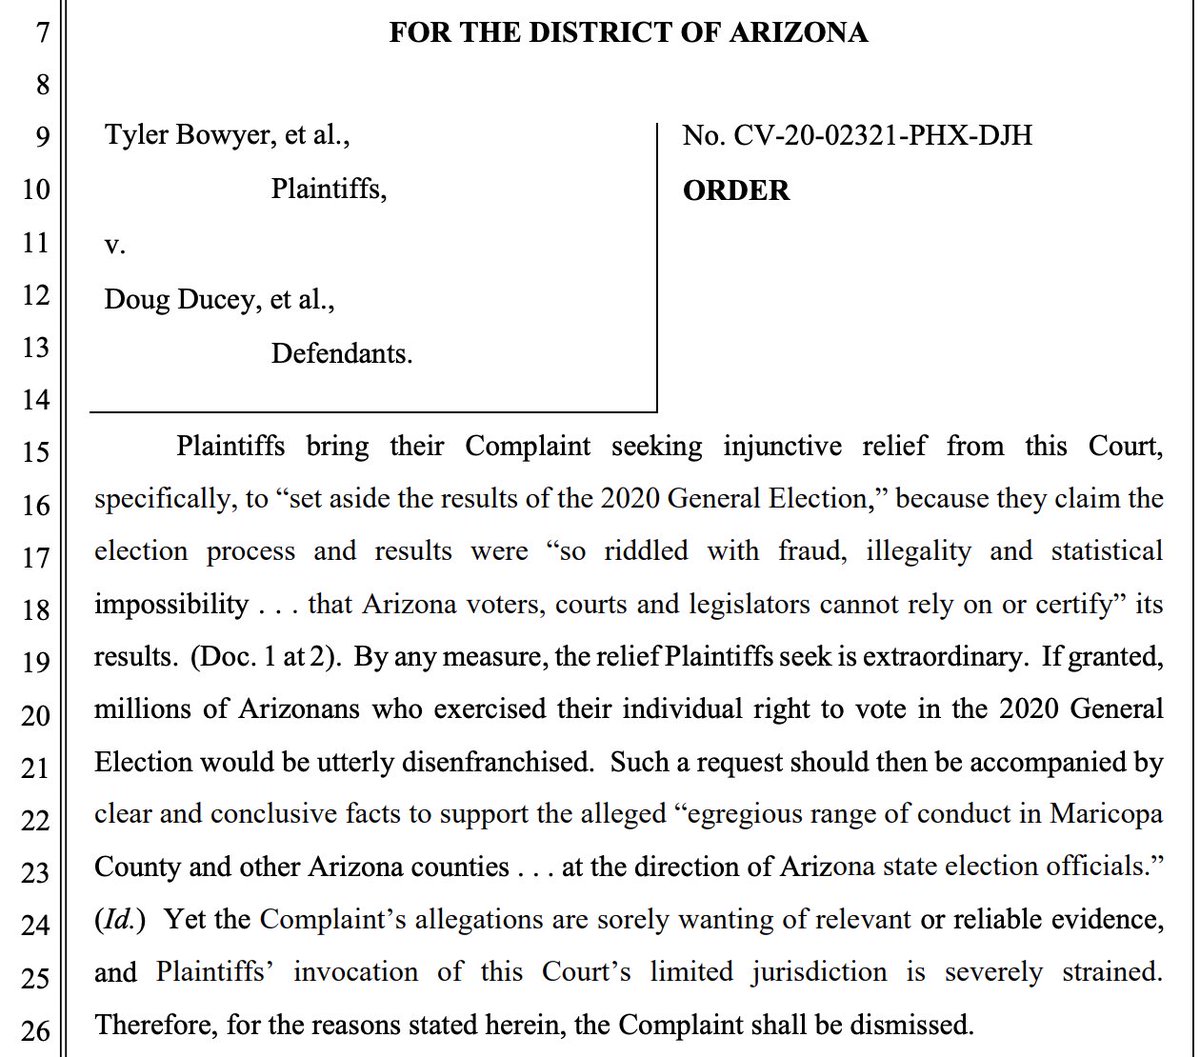 New: A federal judge has dismissed Sidney Powell's election challenge in Arizona  http://scribd.com/document/487565633/12-9-20-Bowyer-v-Ducey-Order"...the Complaint’s allegations are sorely wanting of relevant or reliable evidence, and Plaintiffs’ invocation of this Court’s limited jurisdiction is severely strained."